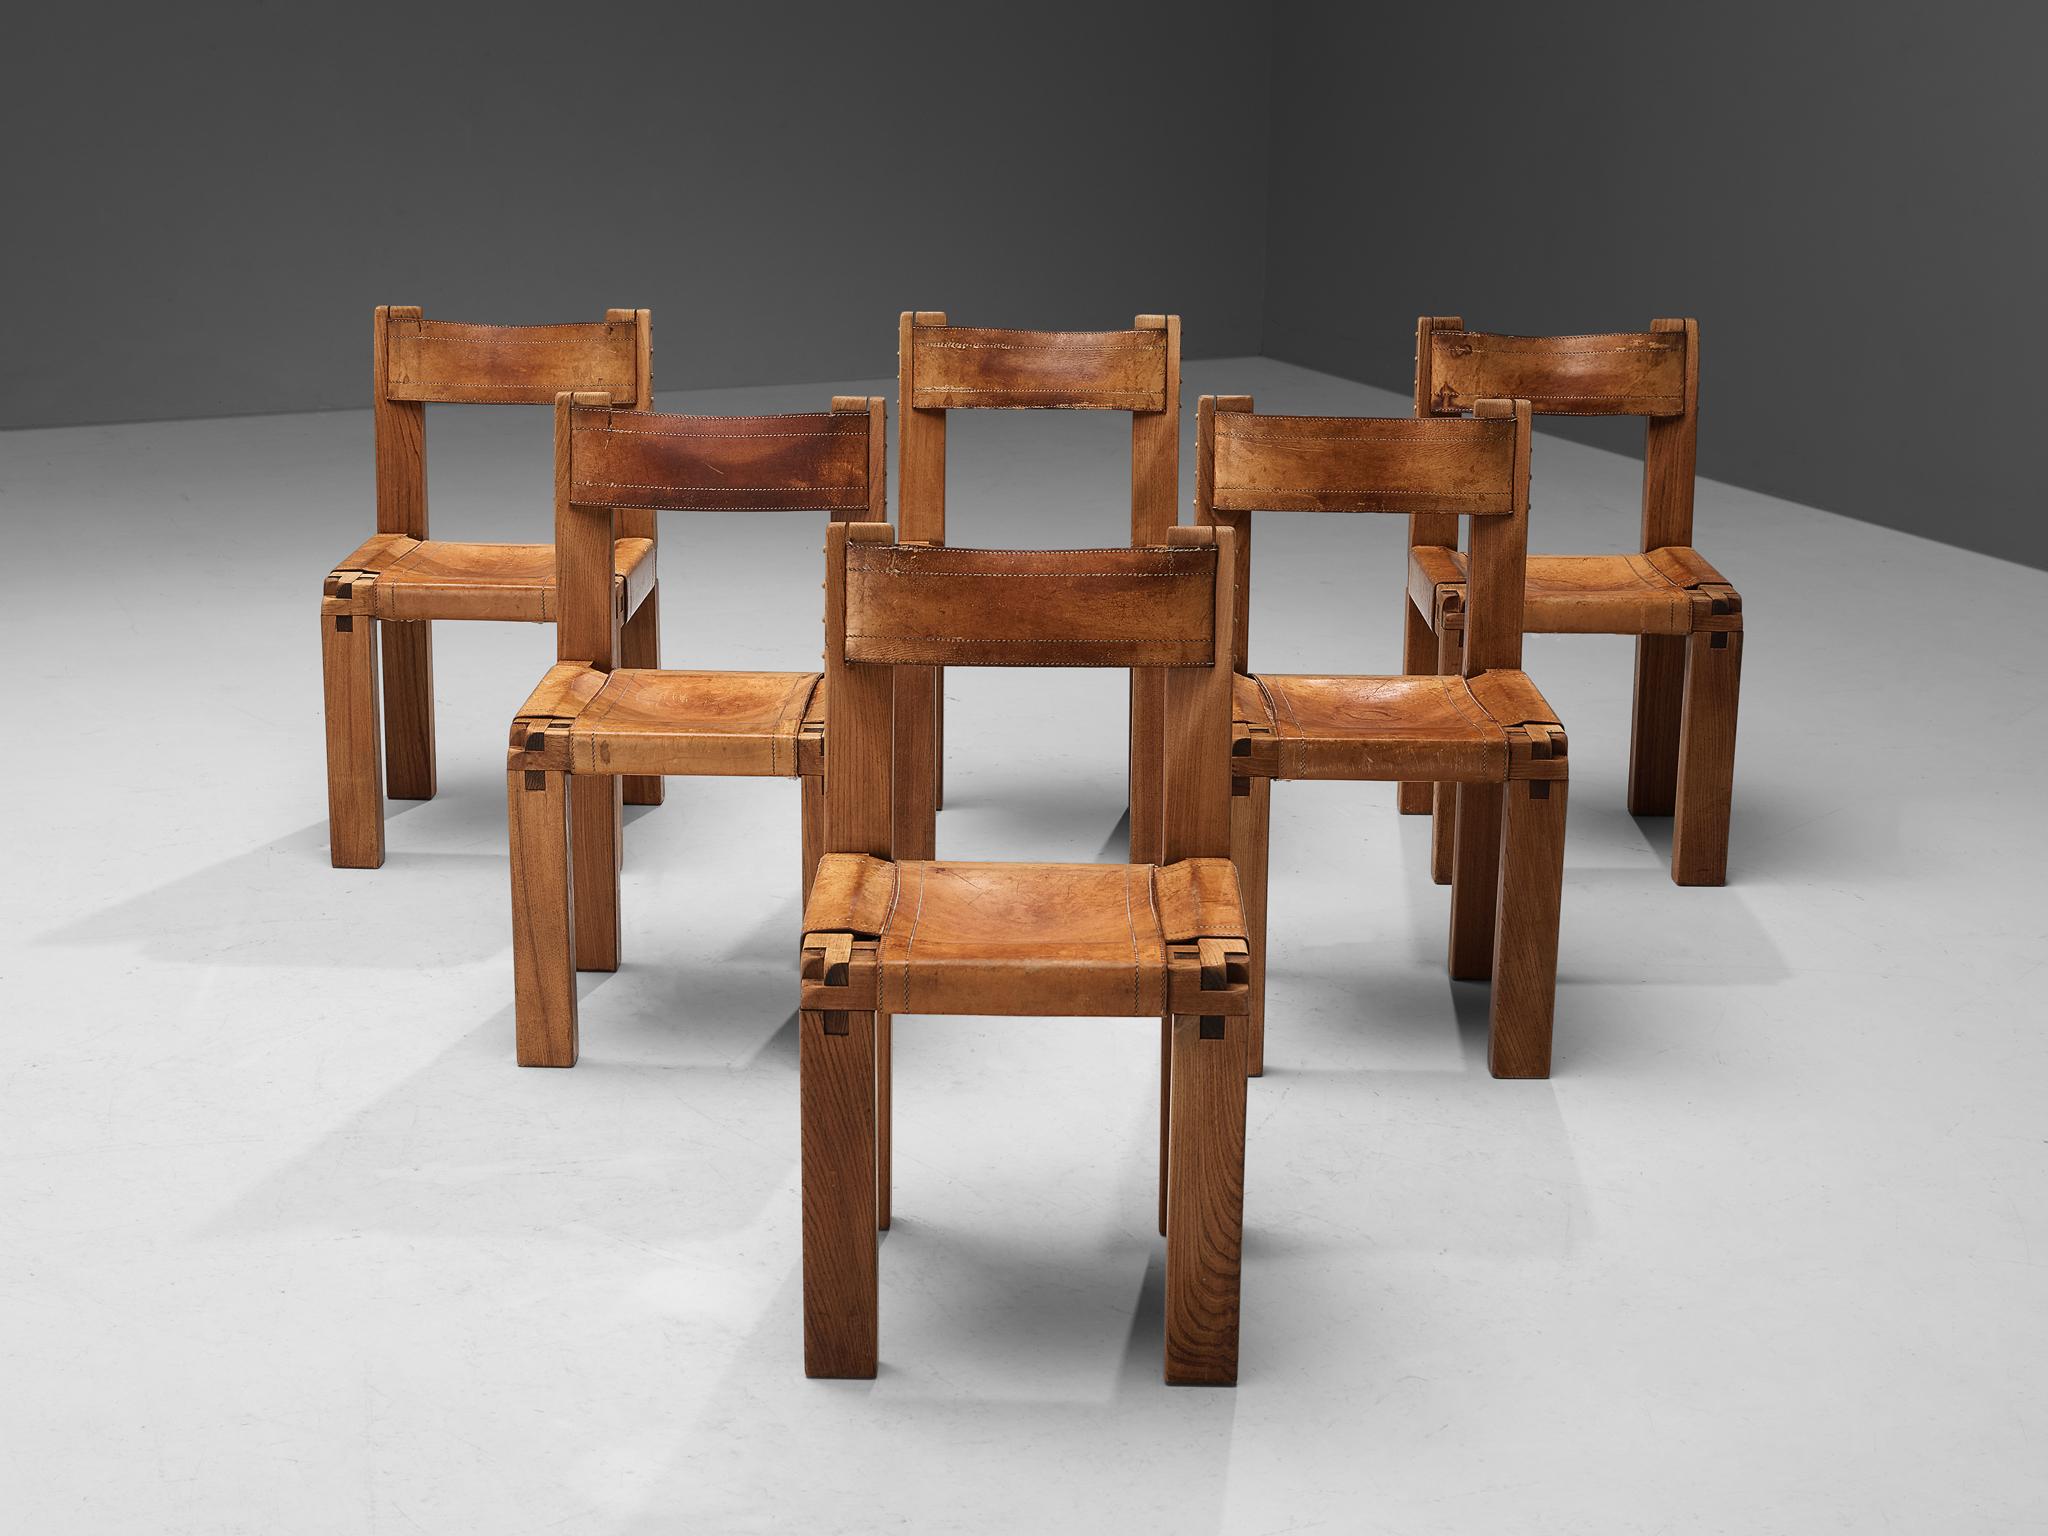 Pierre Chapo, dining chairs model 'S11', elm, leather, France, circa 1966.

A set of six chairs in solid elmwood with cognac leather seating and back, designed by French designer Pierre Chapo. These chairs have a cubic design of solid elmwood with